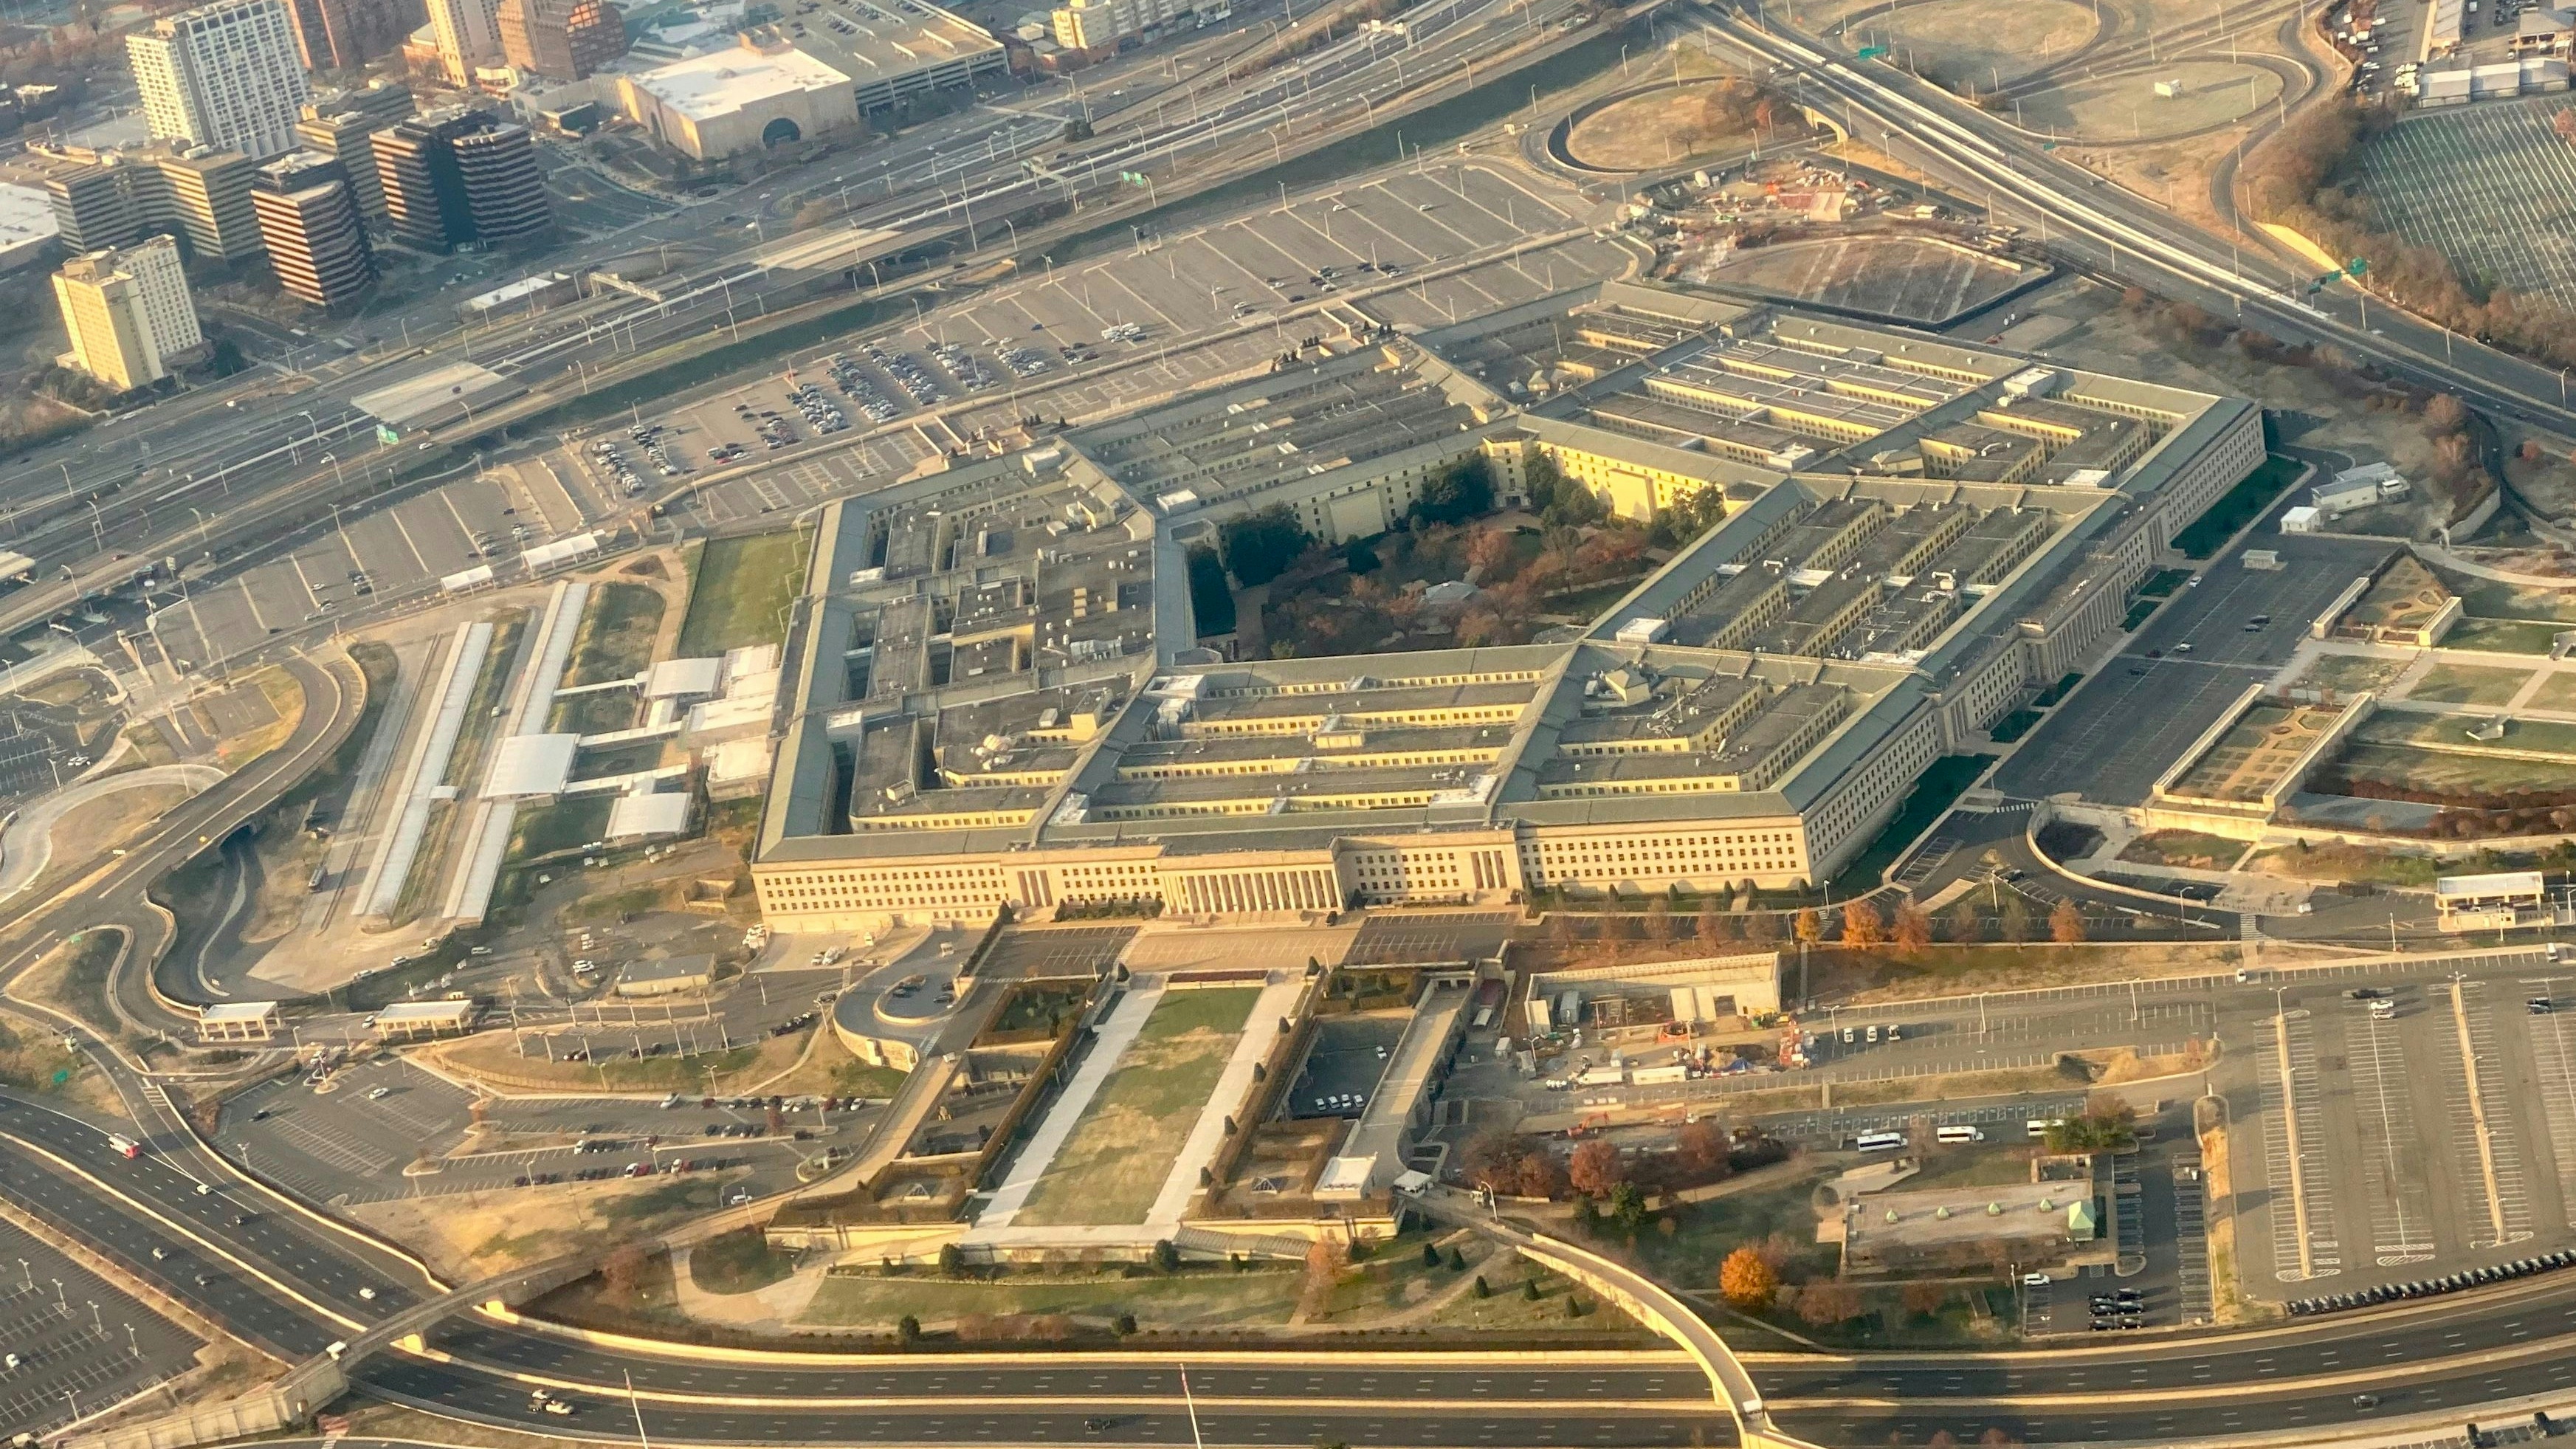 The Pentagon, the headquarters of the US Department of Defense